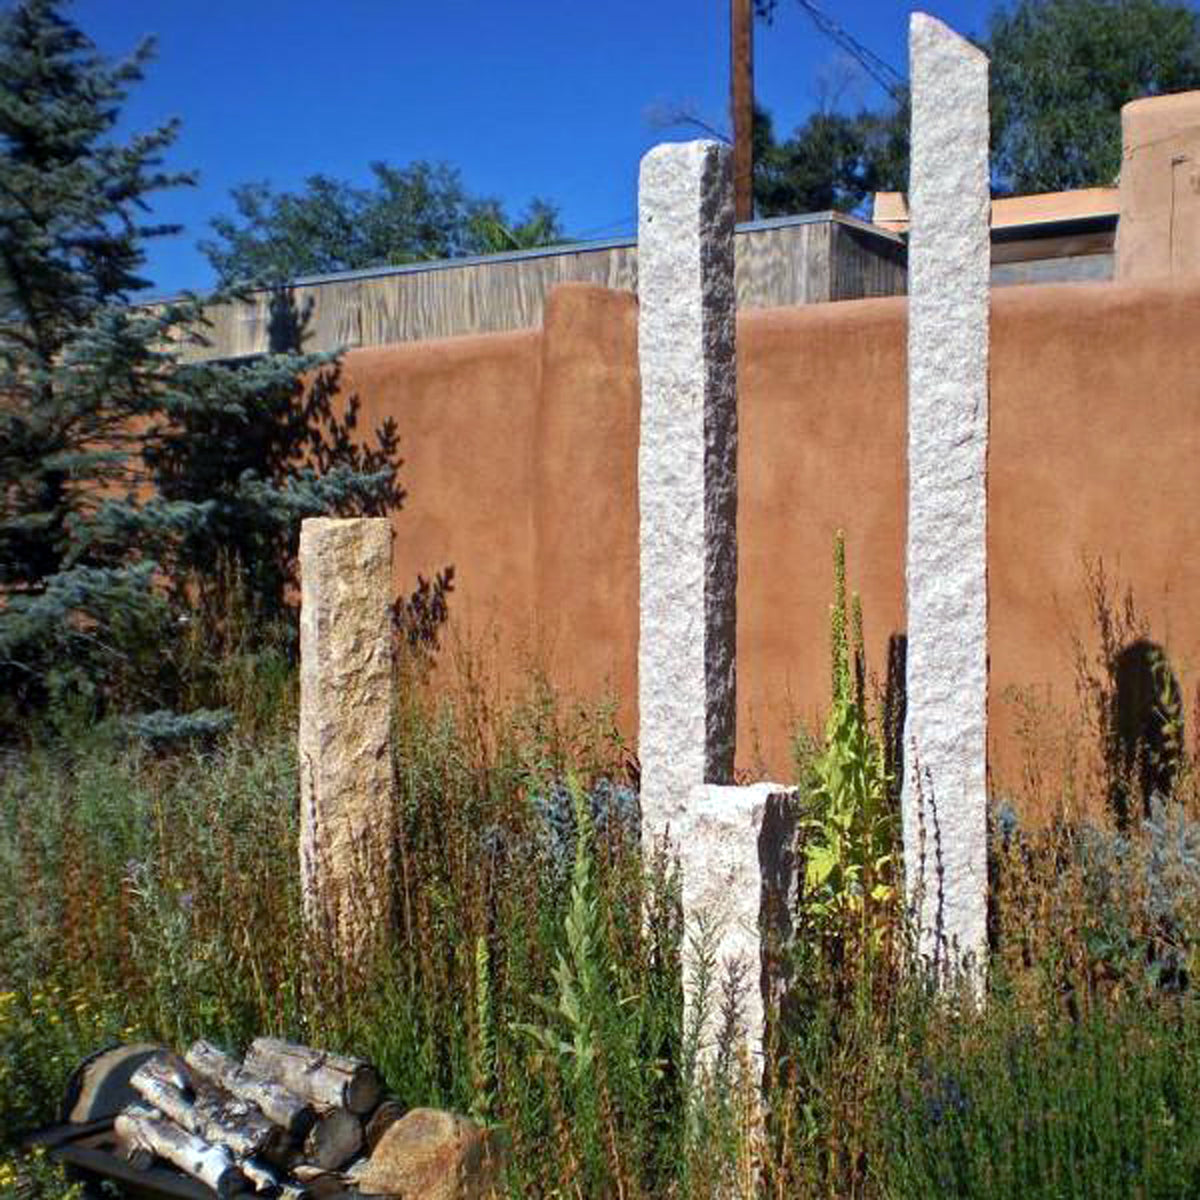 Garden Ornament: Rough chiseled plinths carved from beige granite used as sculptural accents image 1 of 3